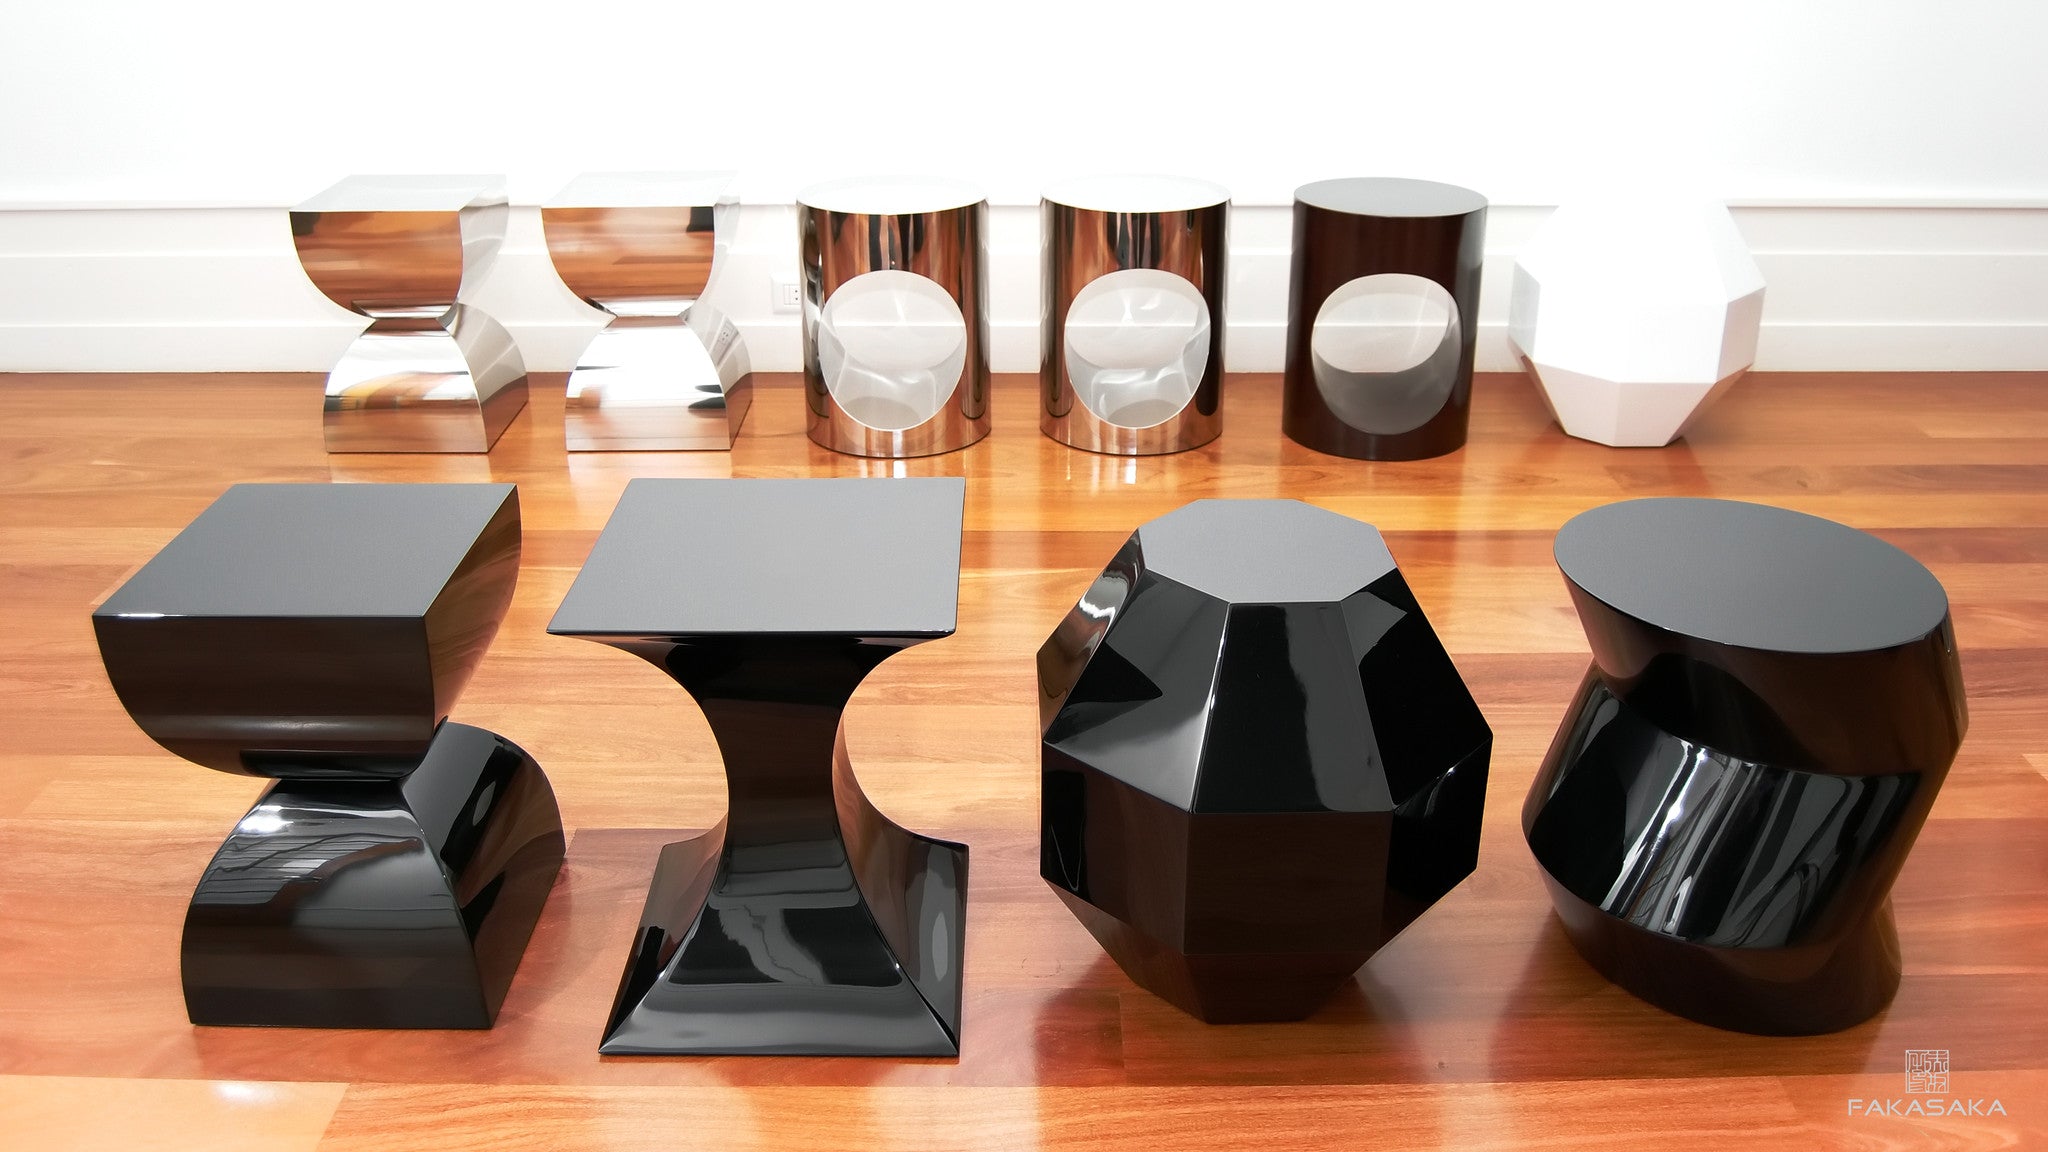 FA5<br><br>STOOL / SIDE TABLE / DRINK TABLE <br><br>LACQUER BLACK